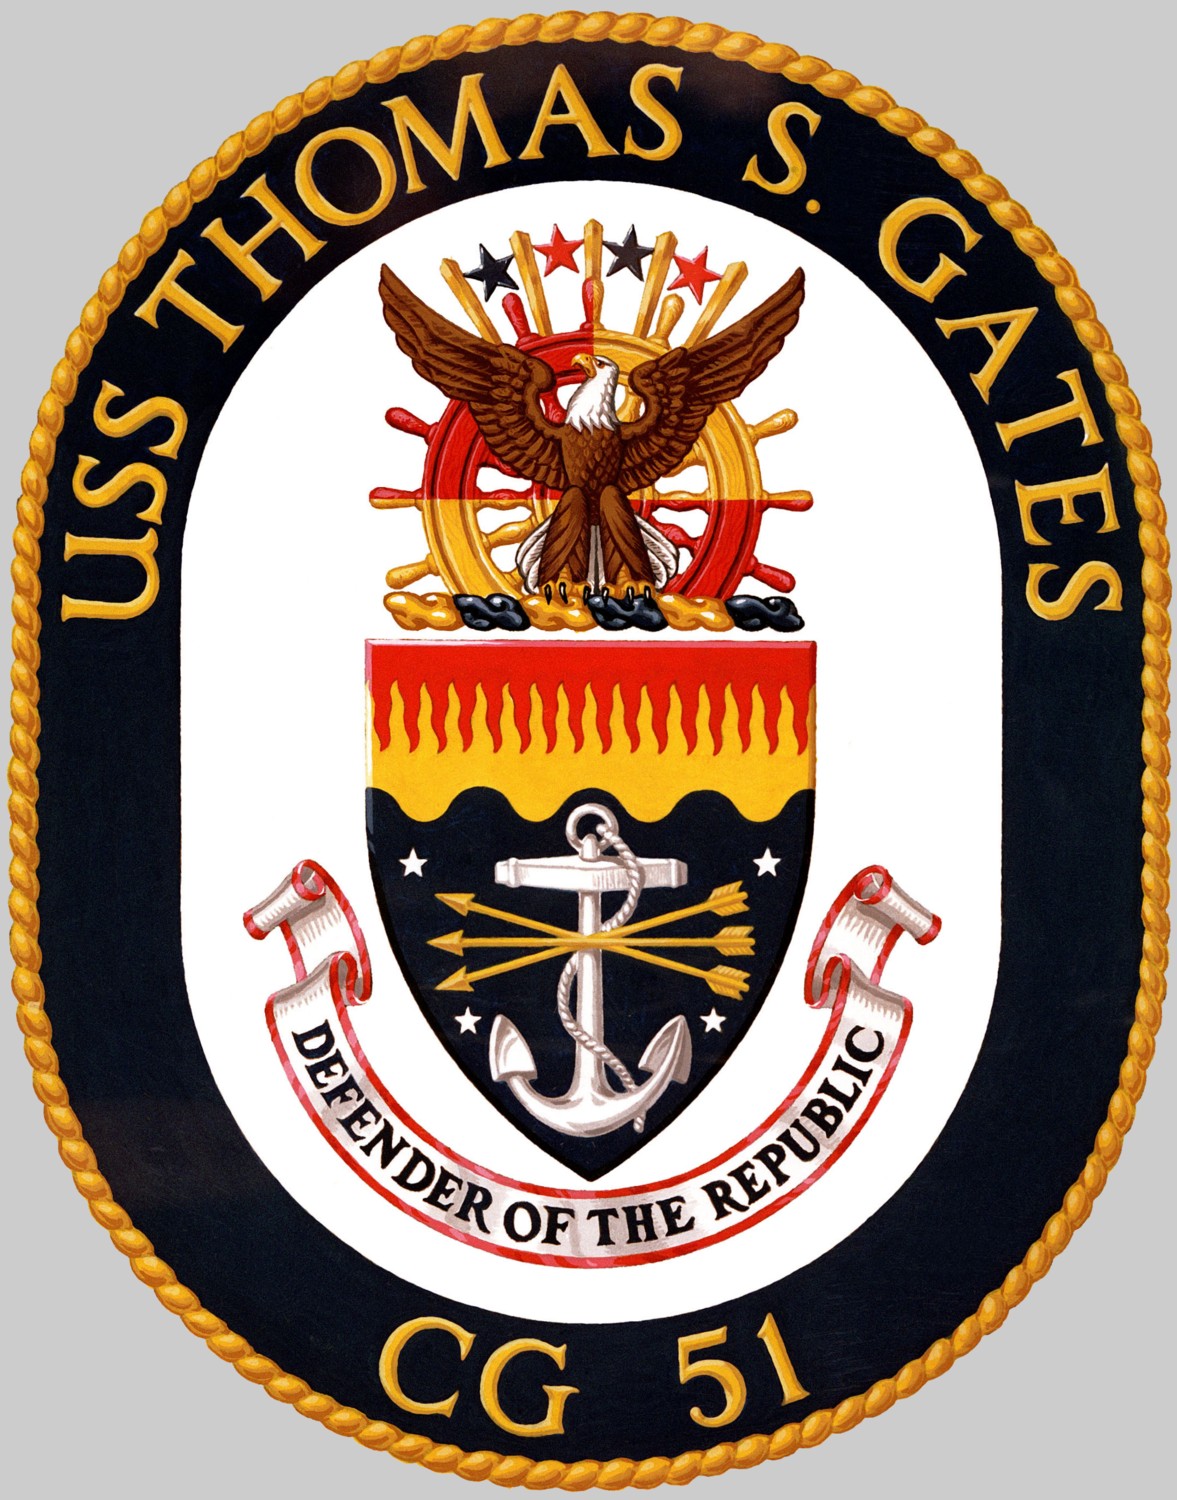 cg-51 uss thomas s. gates insignia crest patch badge ticonderoga class guided missile cruiser us navy 03c